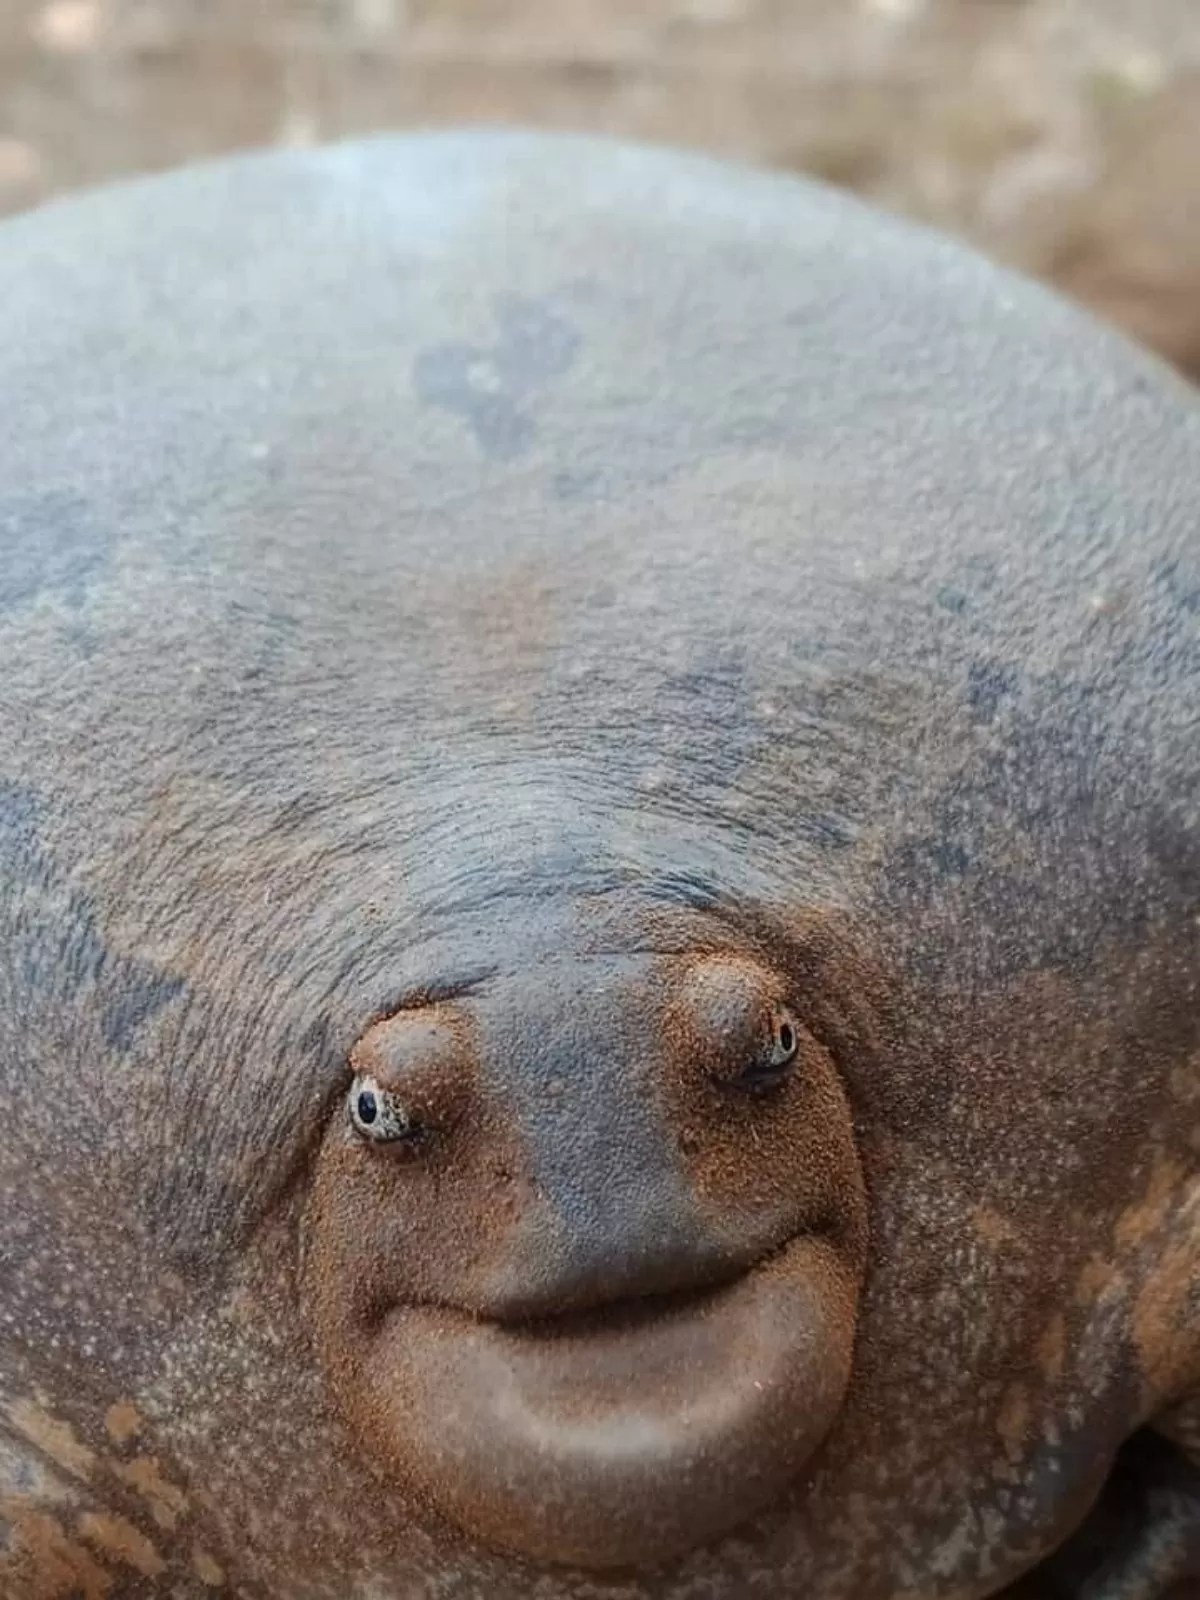 A closer look in the blunt-headed burrowing frog's face